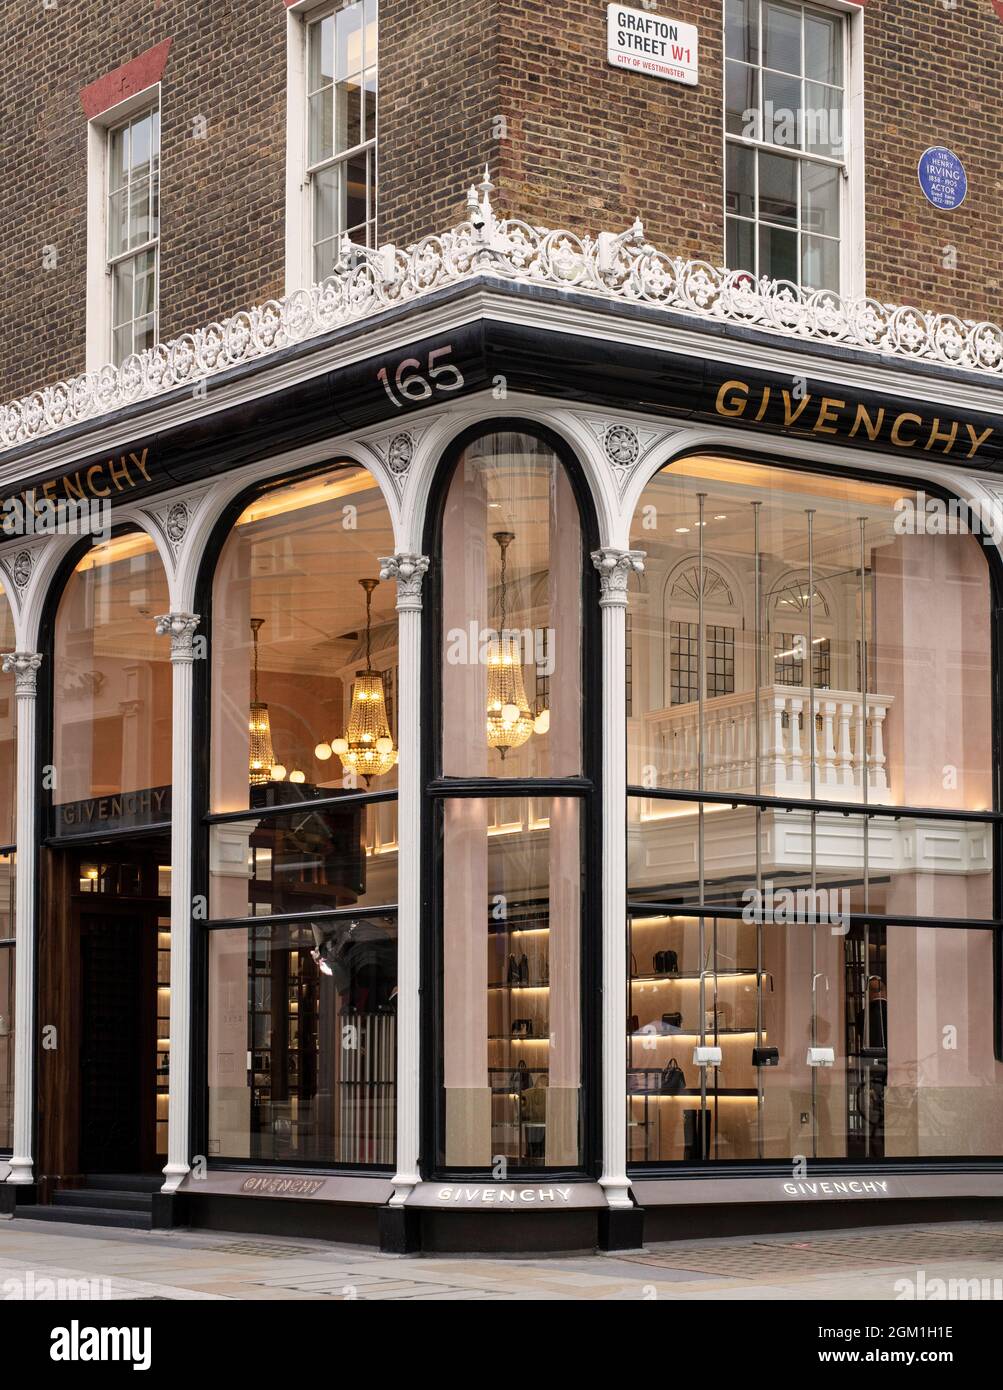 Givenchy, Bond St, Westminster, London, UK; a fashion outlet in an ultra-fashionable shopping street, principally for luxury goods Stock Photo